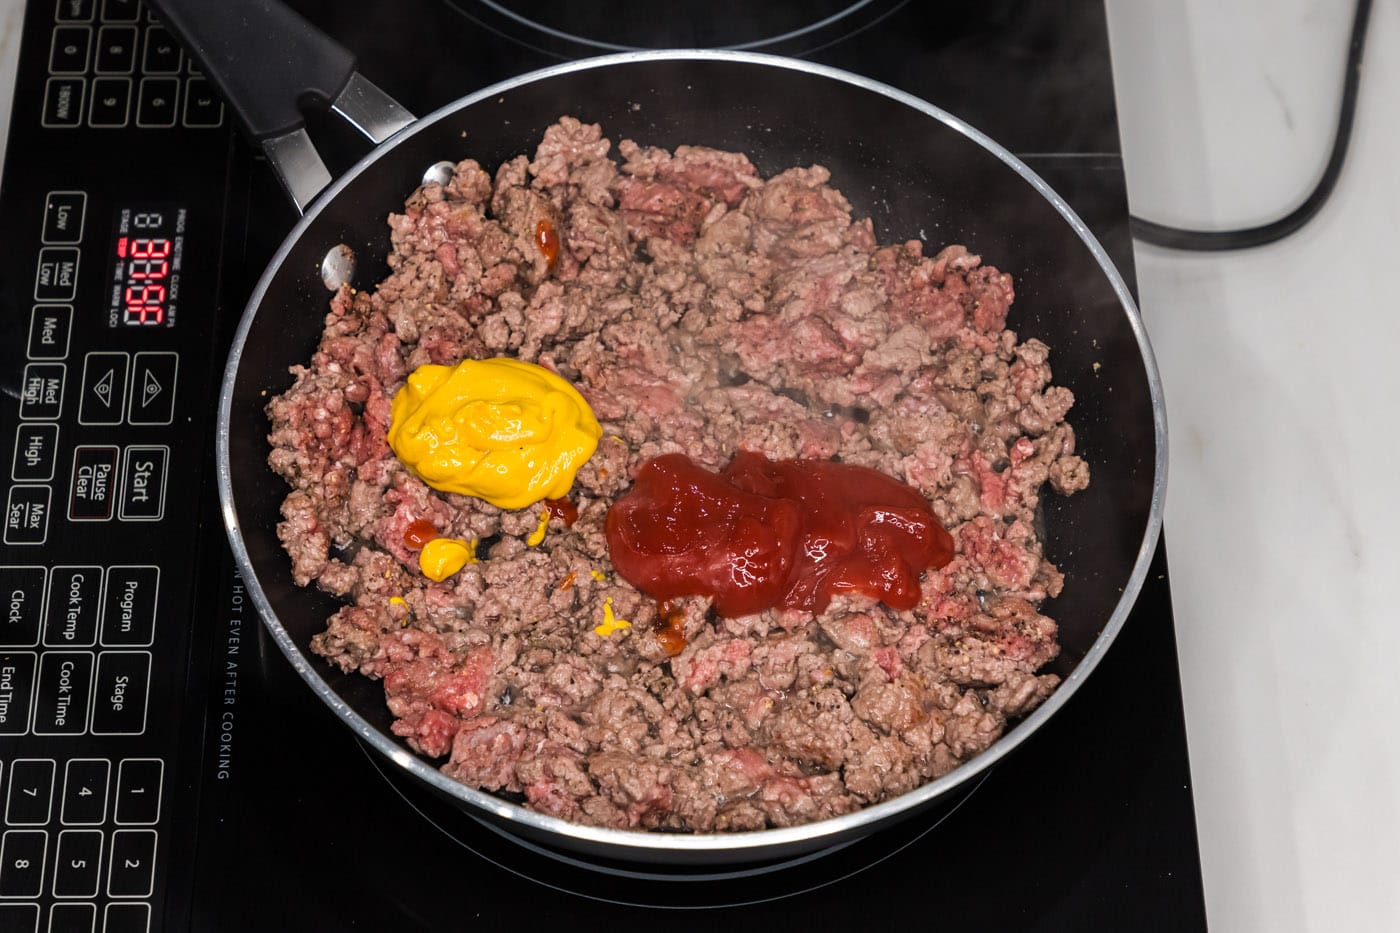 mustard and ketchup added to ground beef in skillet